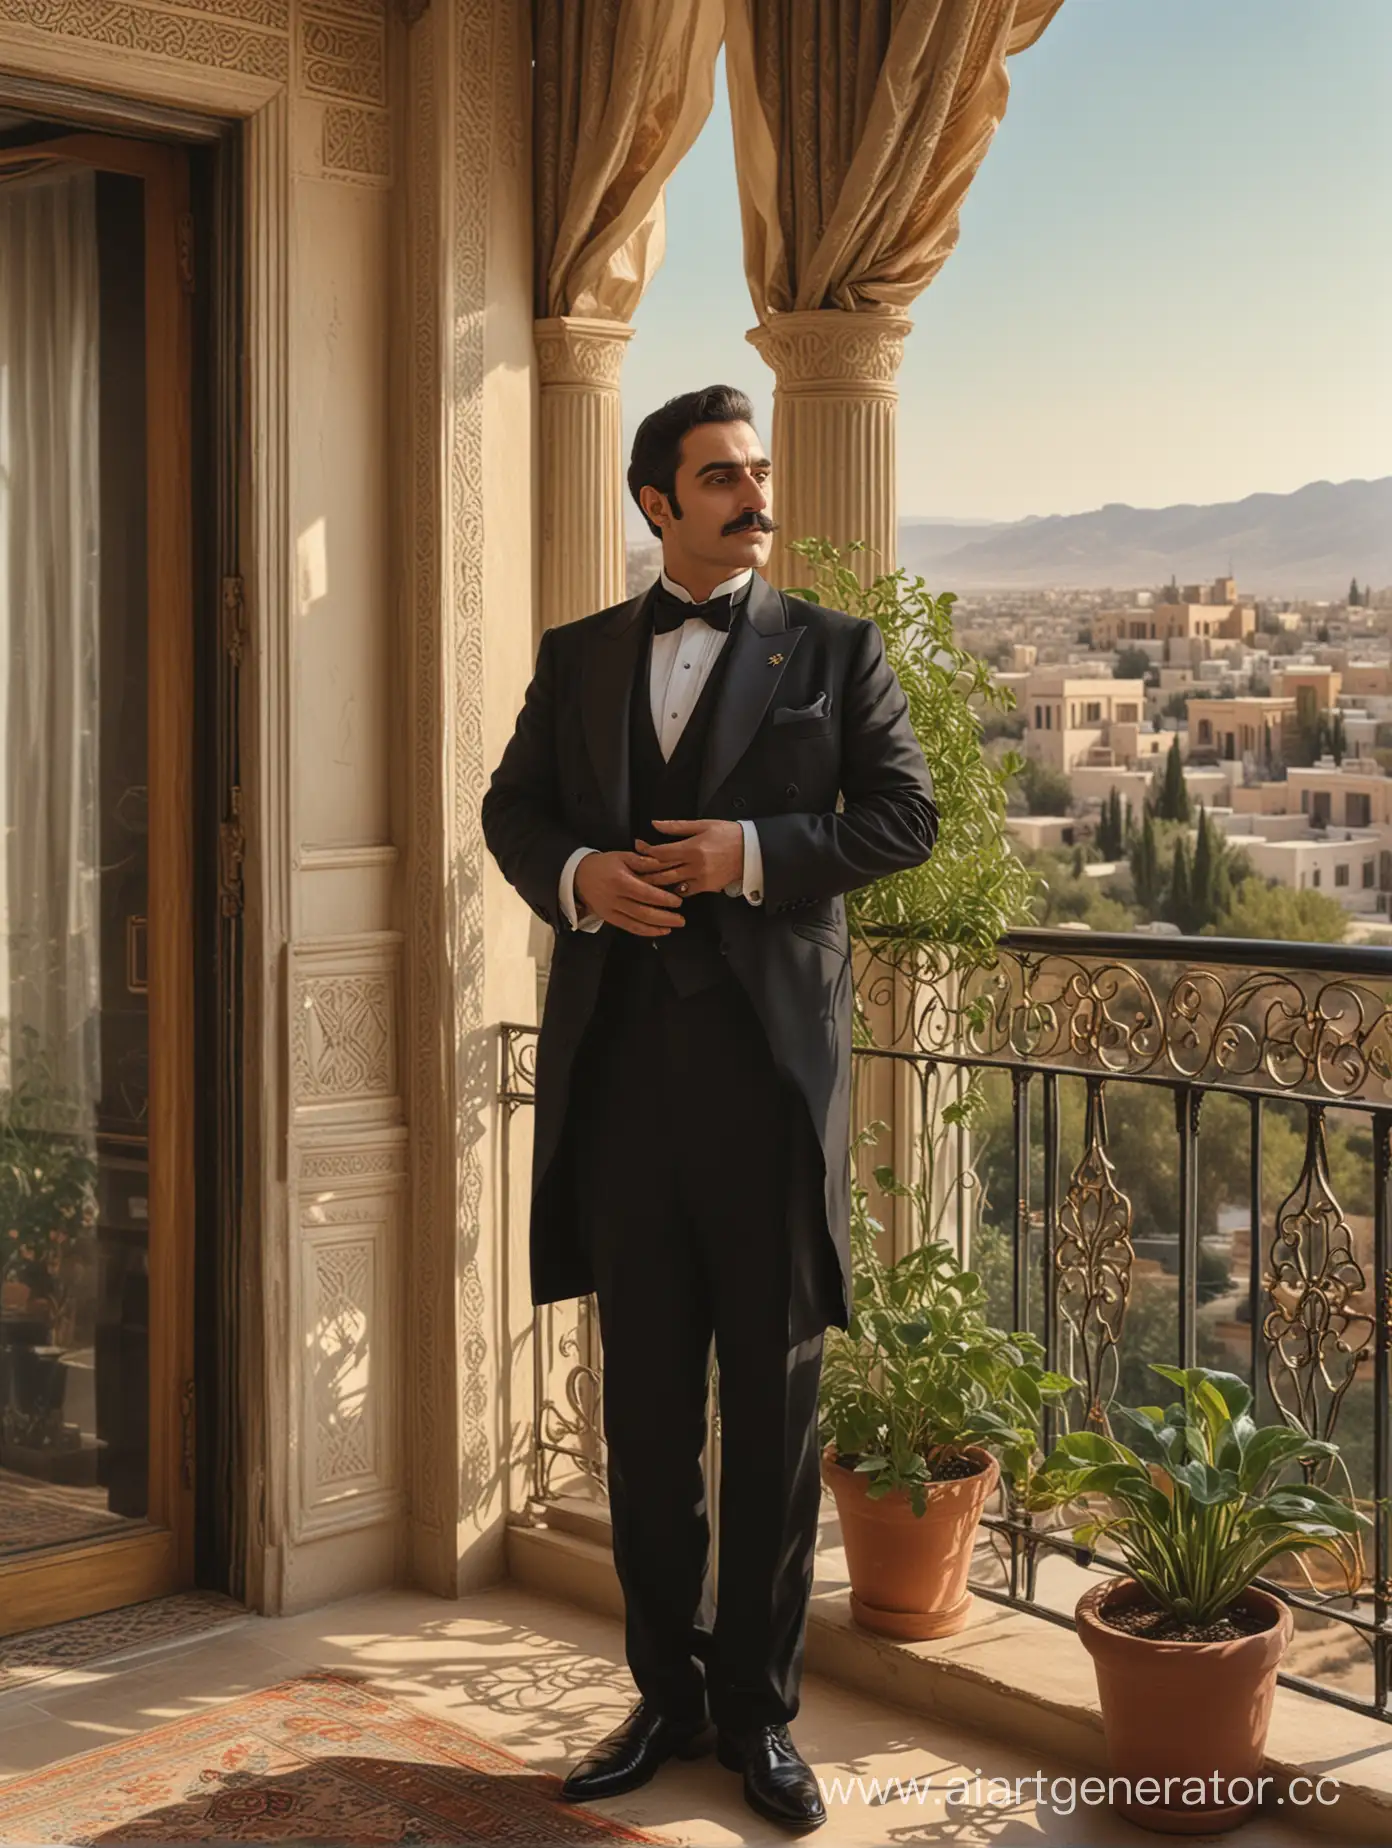 a man His smooth, standing on the balcony of his luxurious home  in a tuxedo looking off into the distance with a plant in the background in a room, Chafik Charobim, qajar art, promotional image, a character portrait